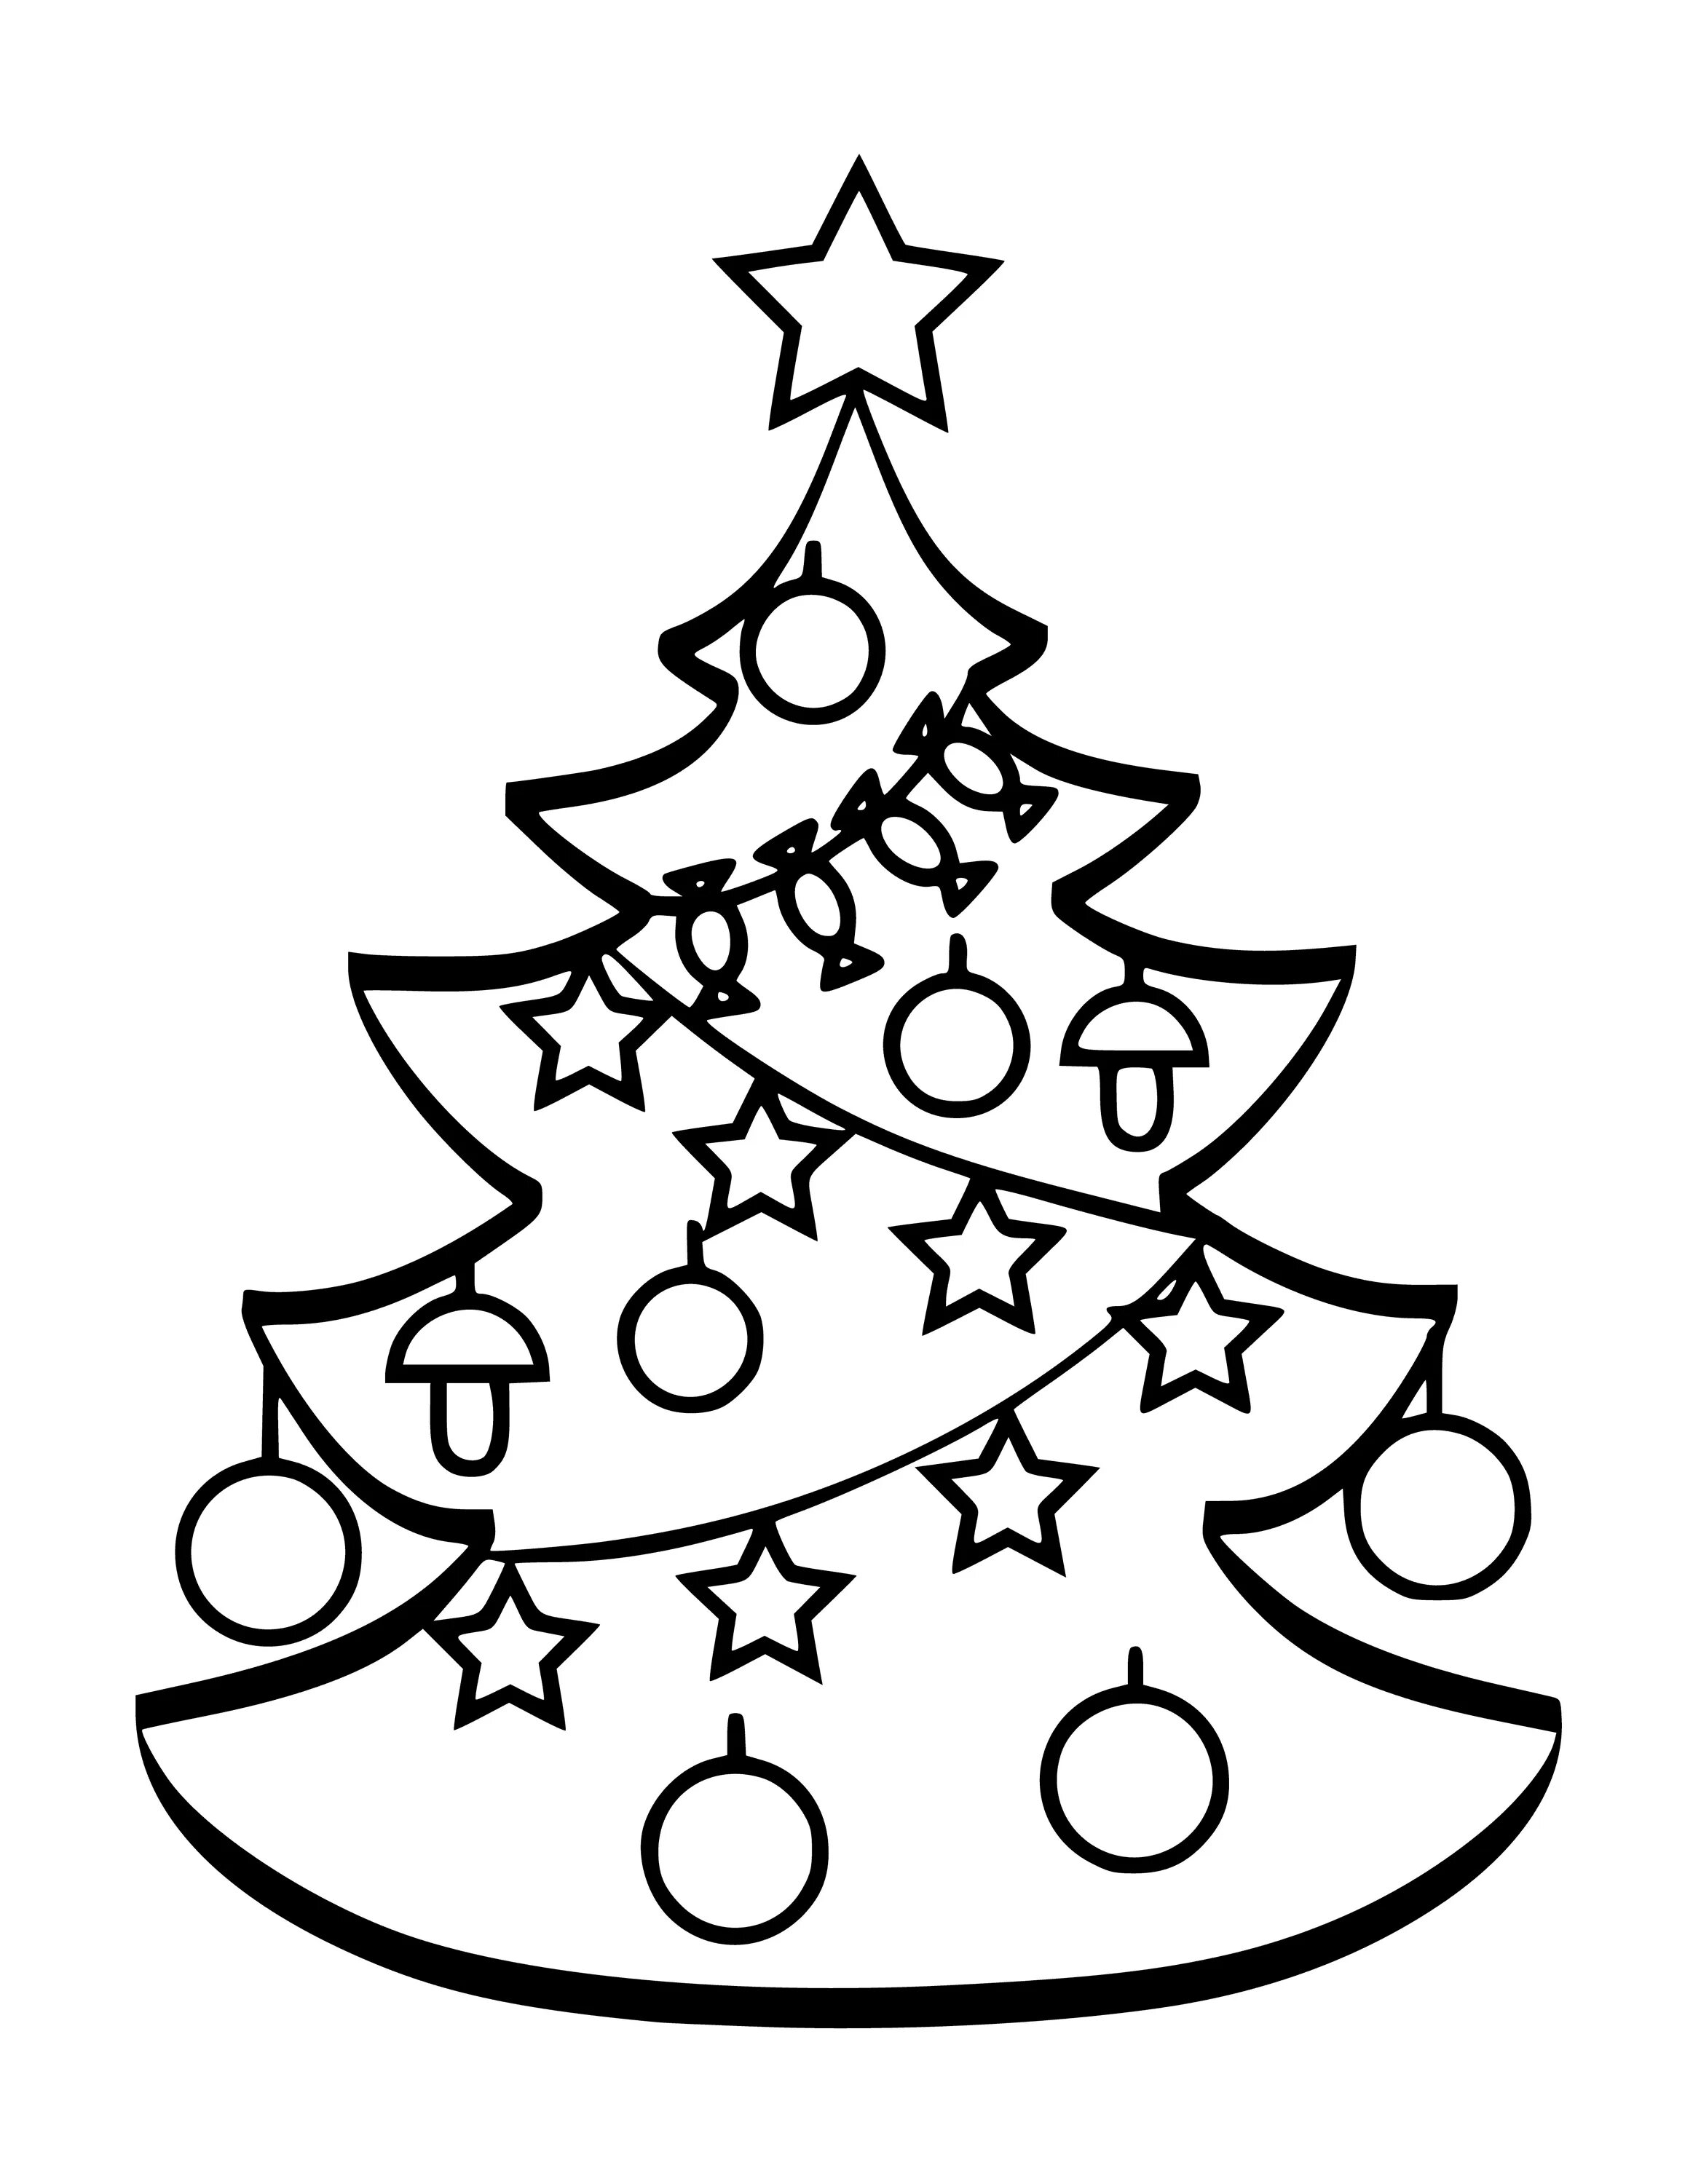 Christmas tree drawing for children #2